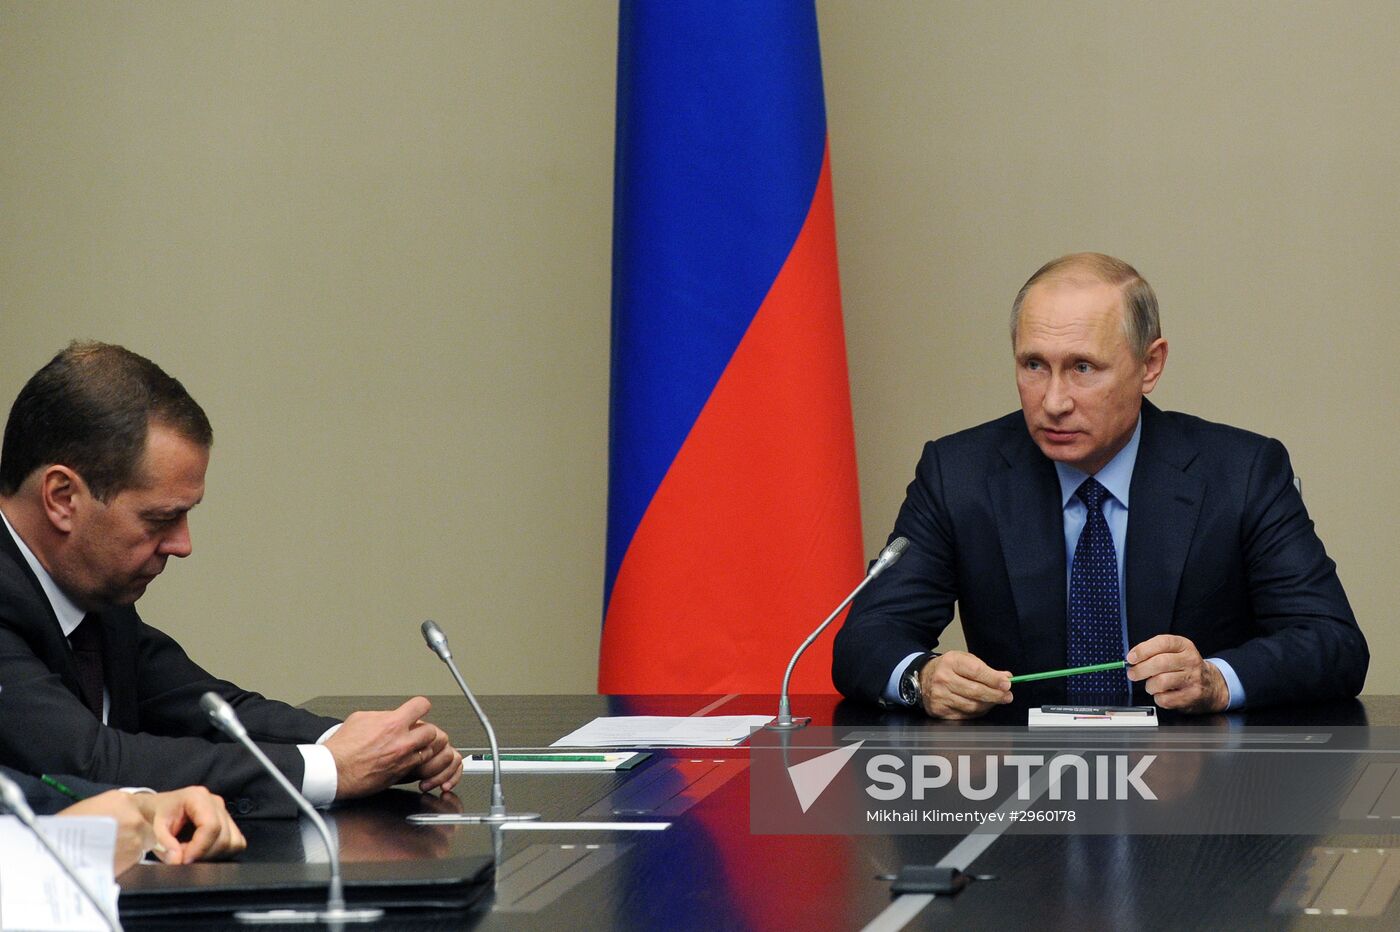 President Putin chairs Russian Security Council meeting